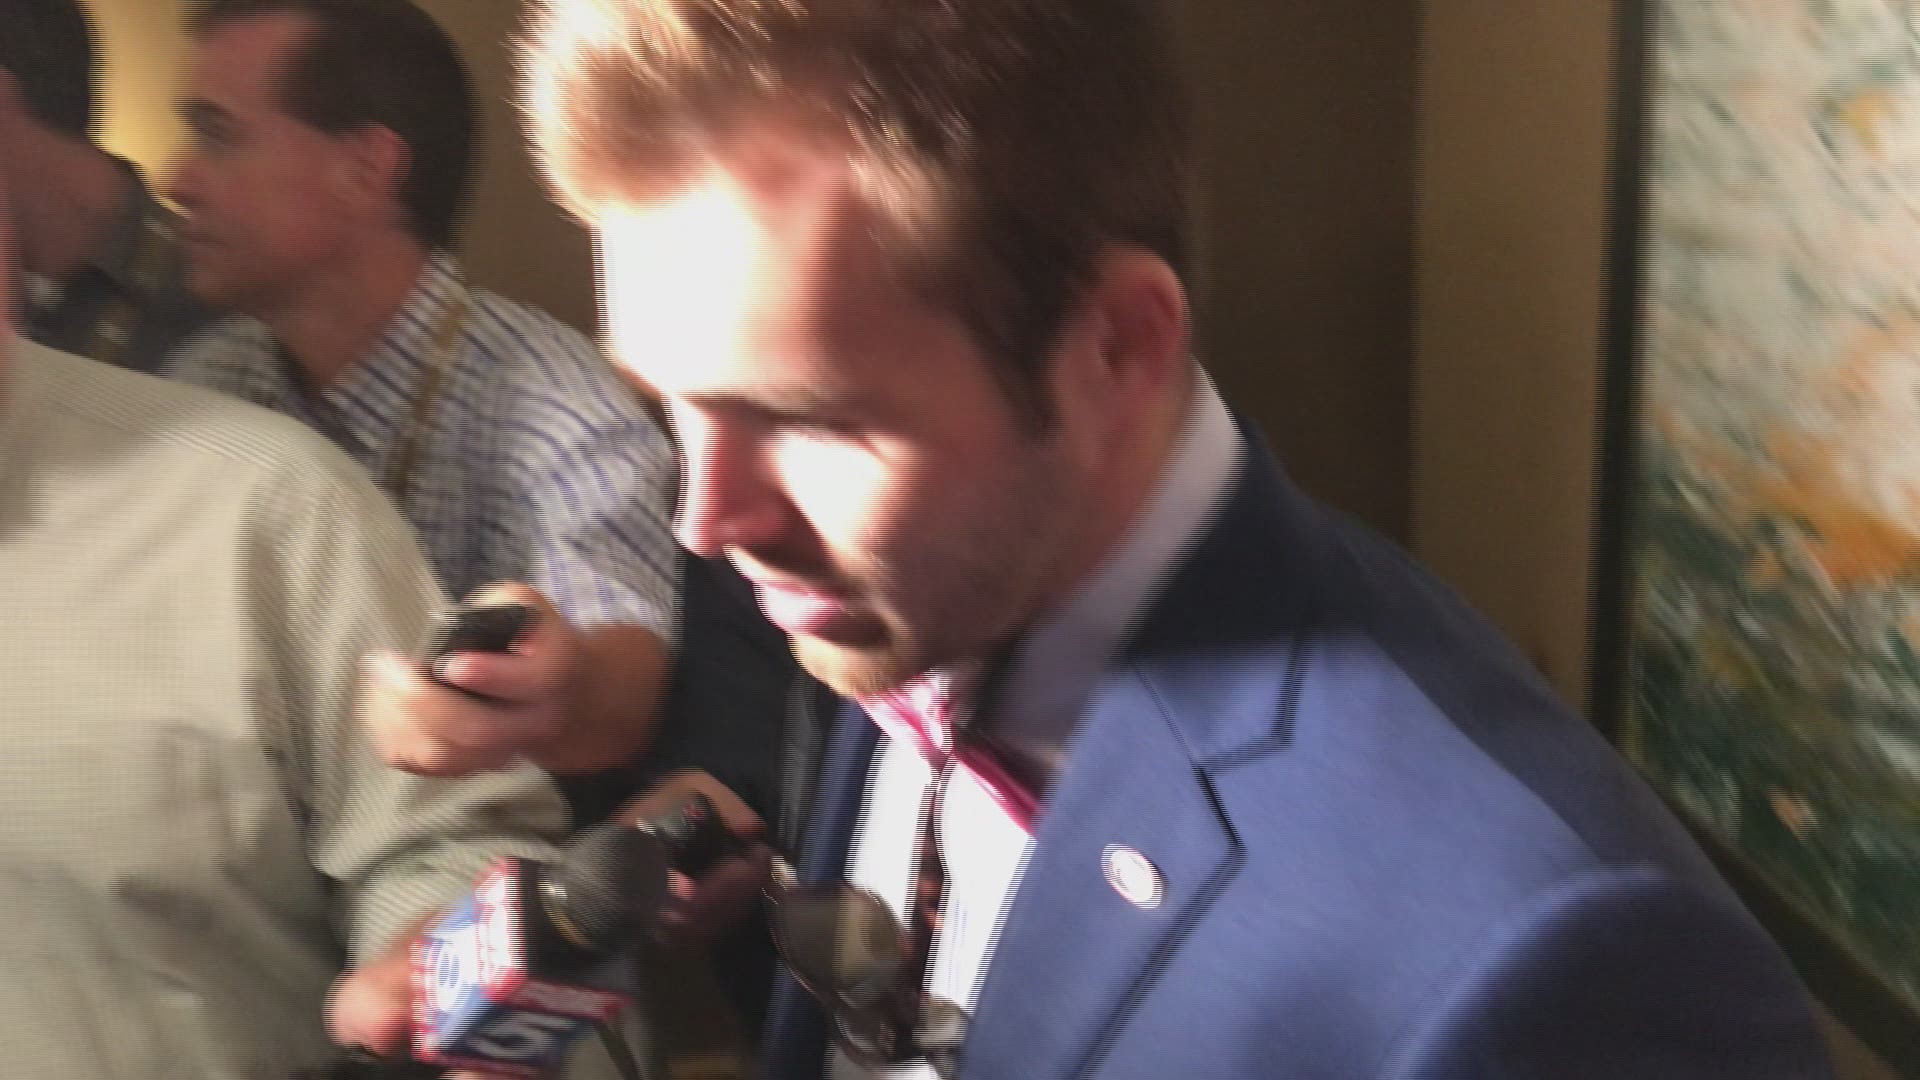 Jake Fromm has NFL Draft hype coming into his 2019 season with the Georgia Bulldogs. Hear what he's focused on in this interview from SEC Media Days.